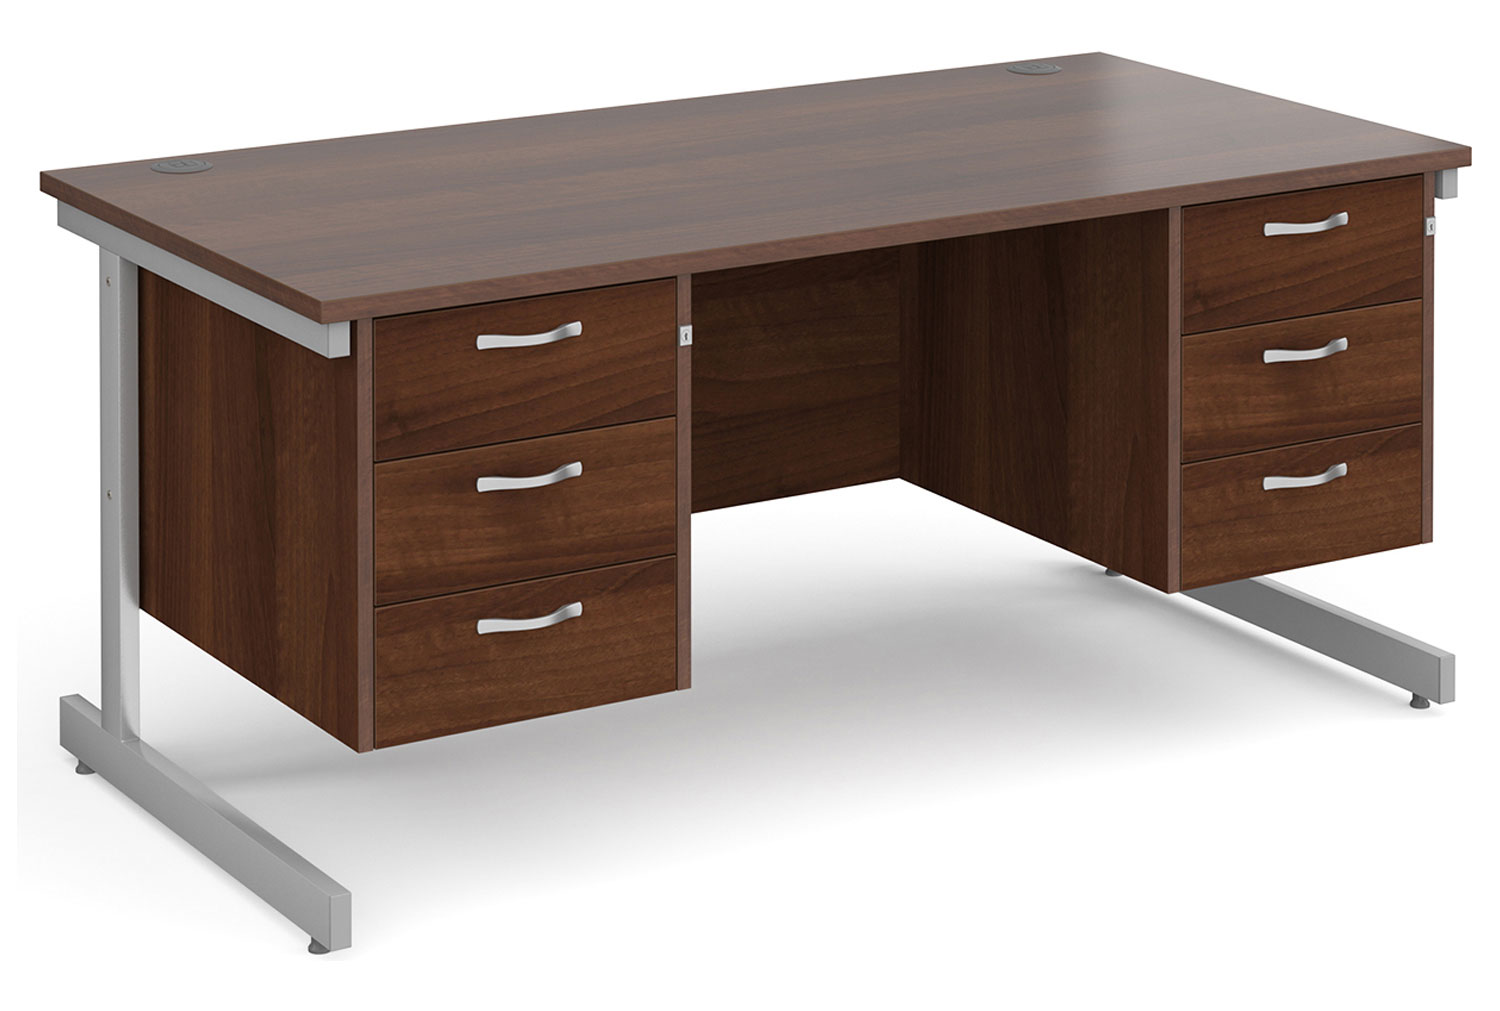 Thrifty Next-Day Rectangular Office Desk 3+3 Drawers Walnut, 160wx80dx73h (cm), Express Delivery